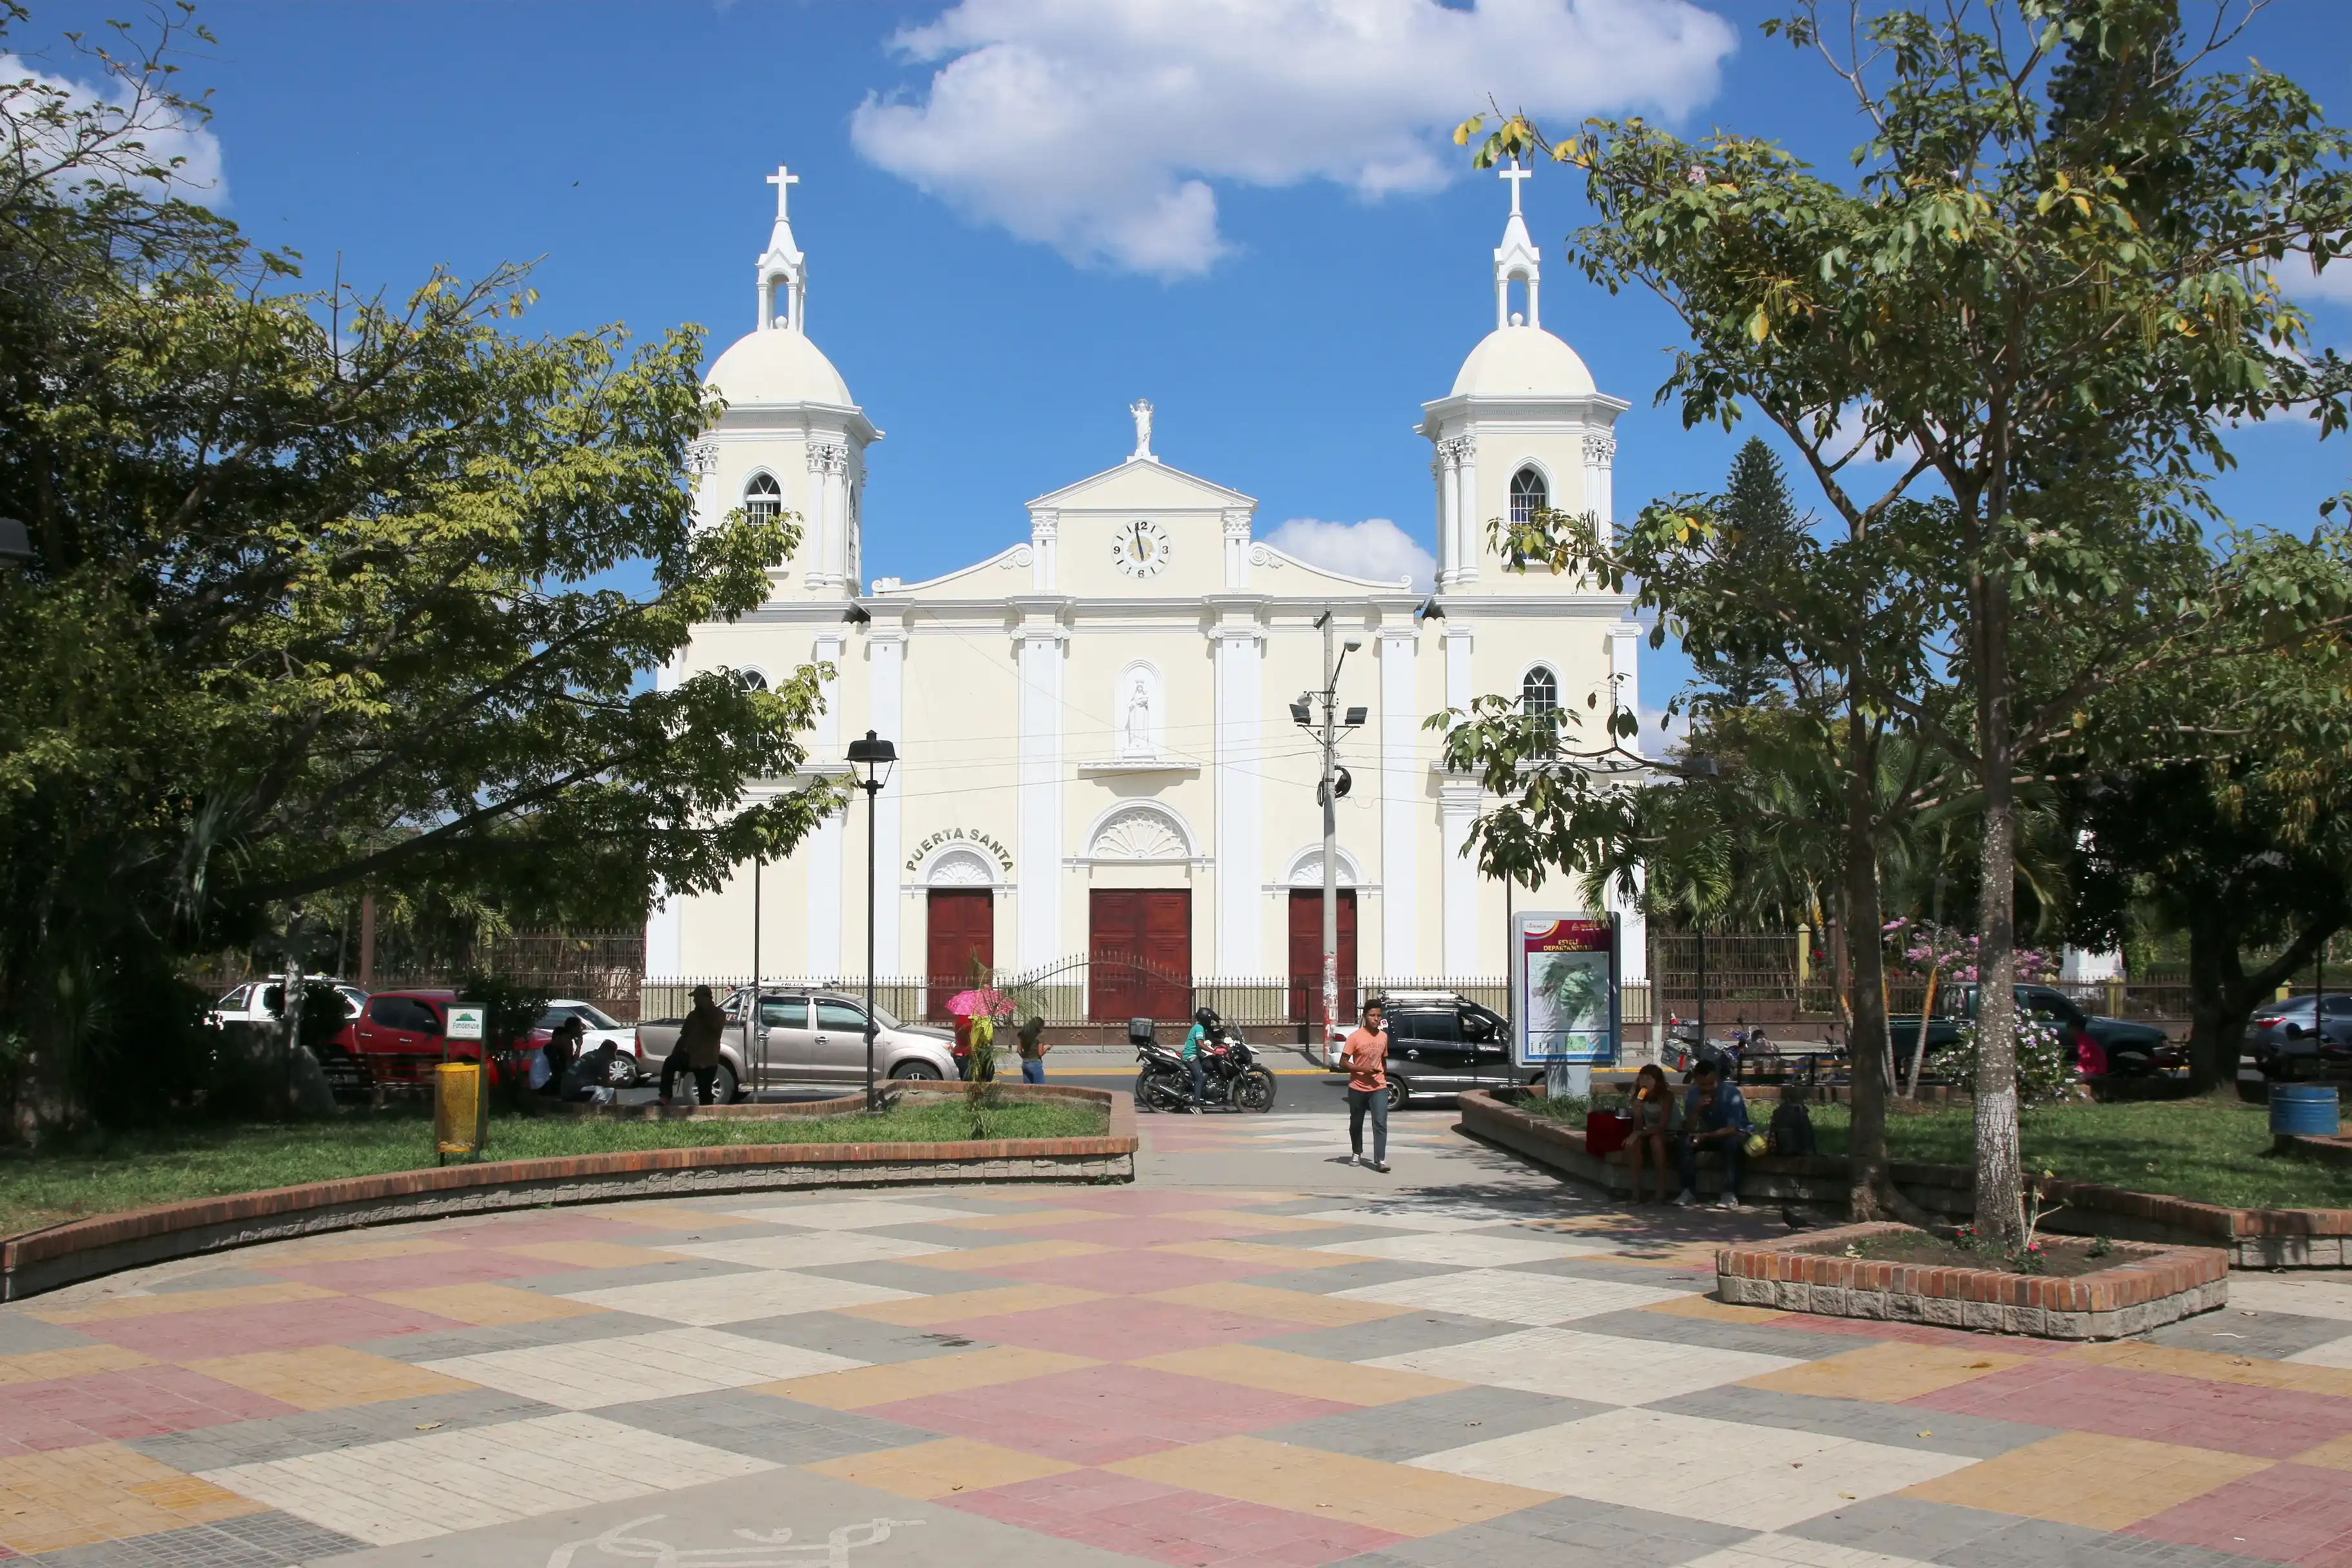 ESTELÍ - NICARAGUA - 2 APRIL 2018 - The main square and the cathedral in Estelí which is a city in Nicaragua.